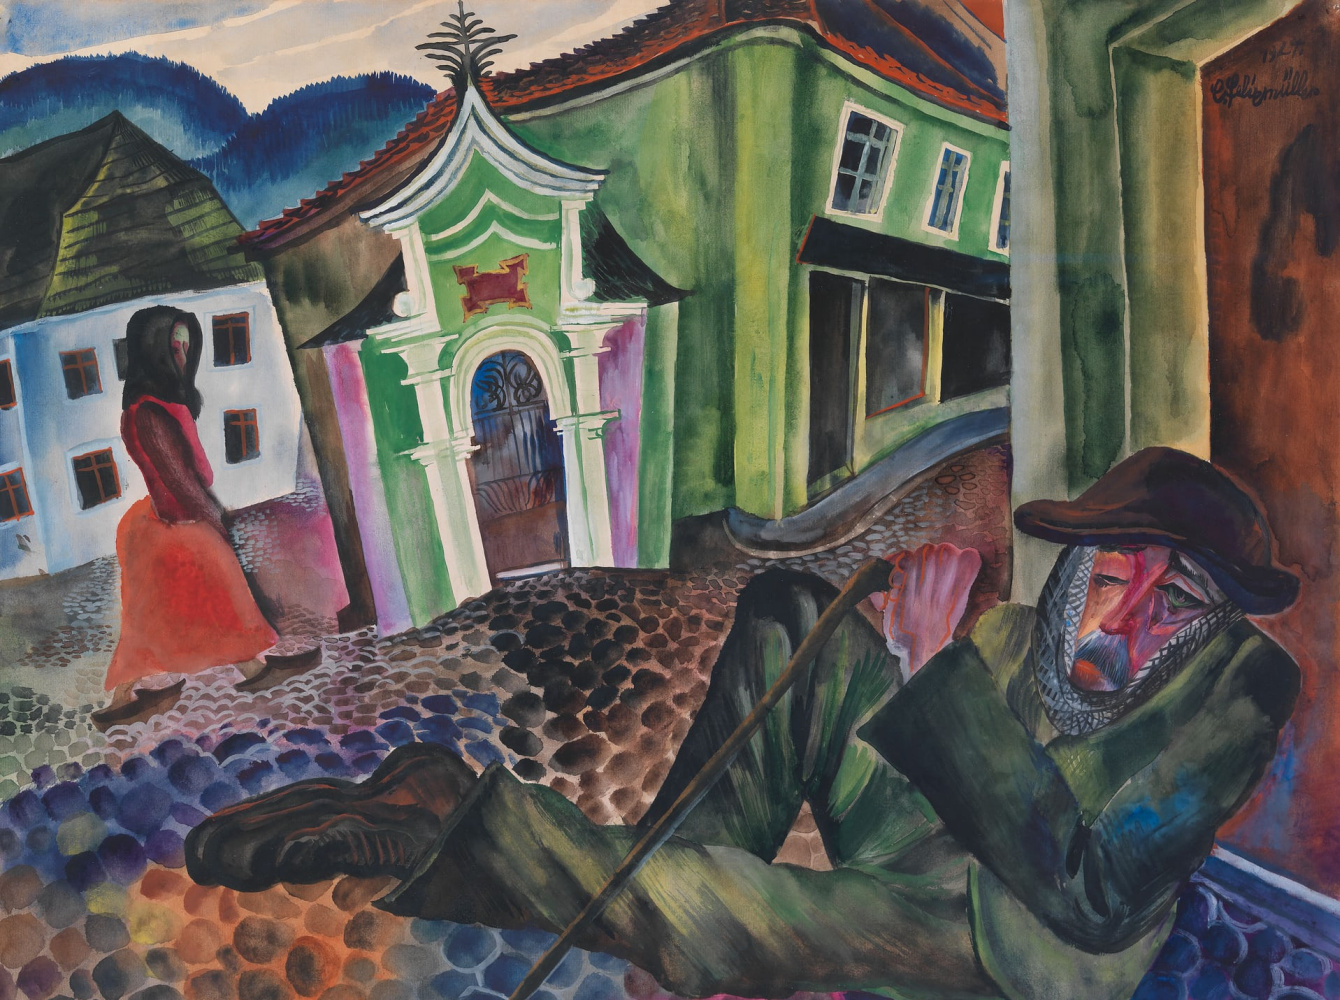 Magic Realism: Art in Weimar Germany 1919-33 full of life, death, sex, and bawdiness